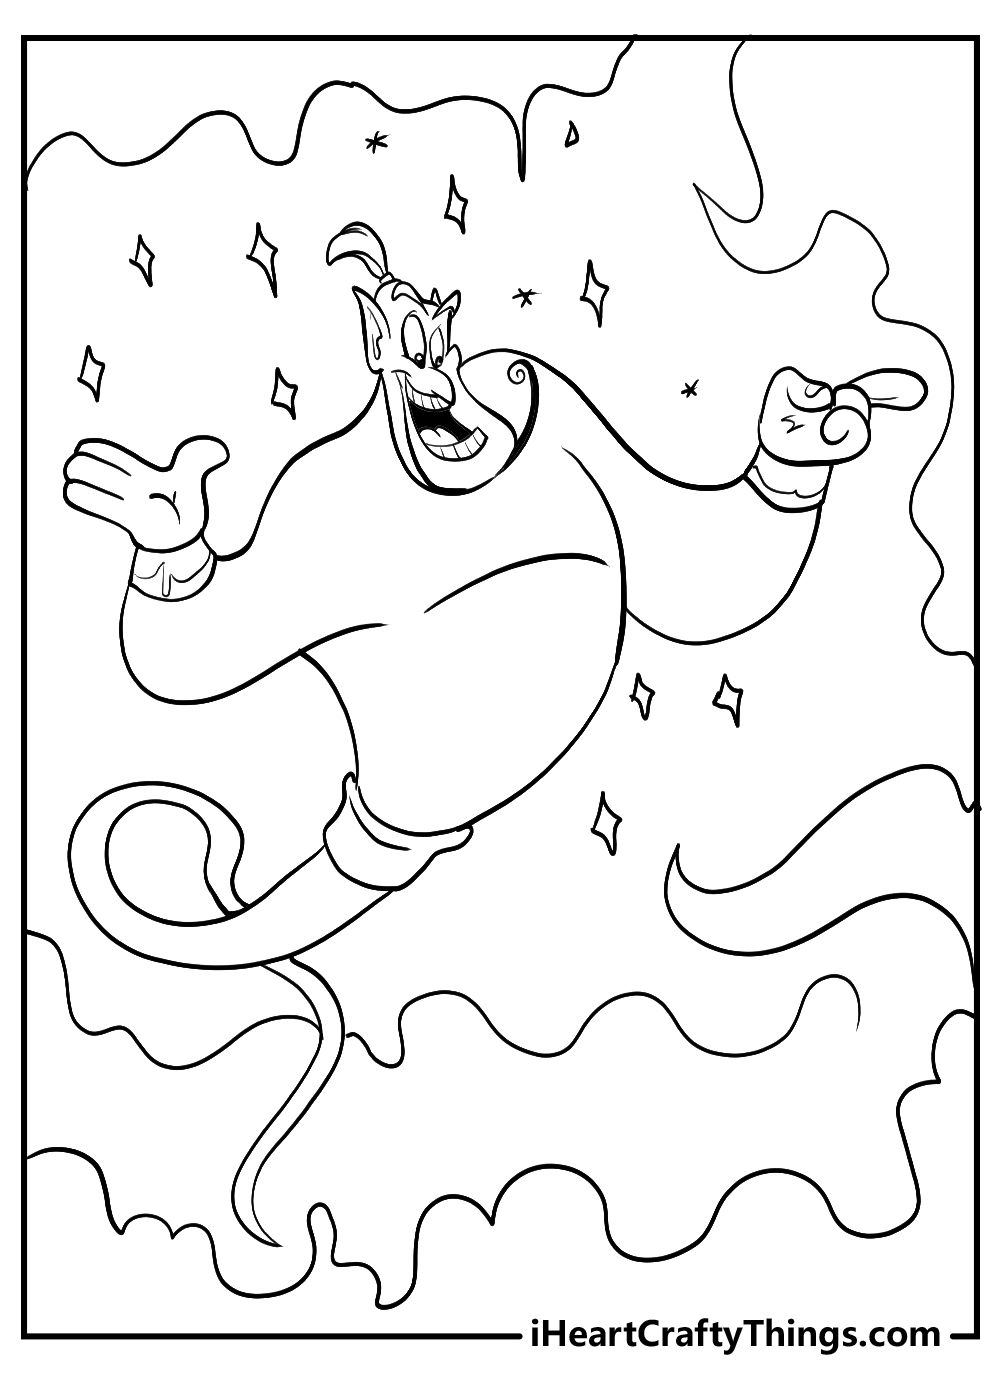 the genie from aladdin coloring sheet